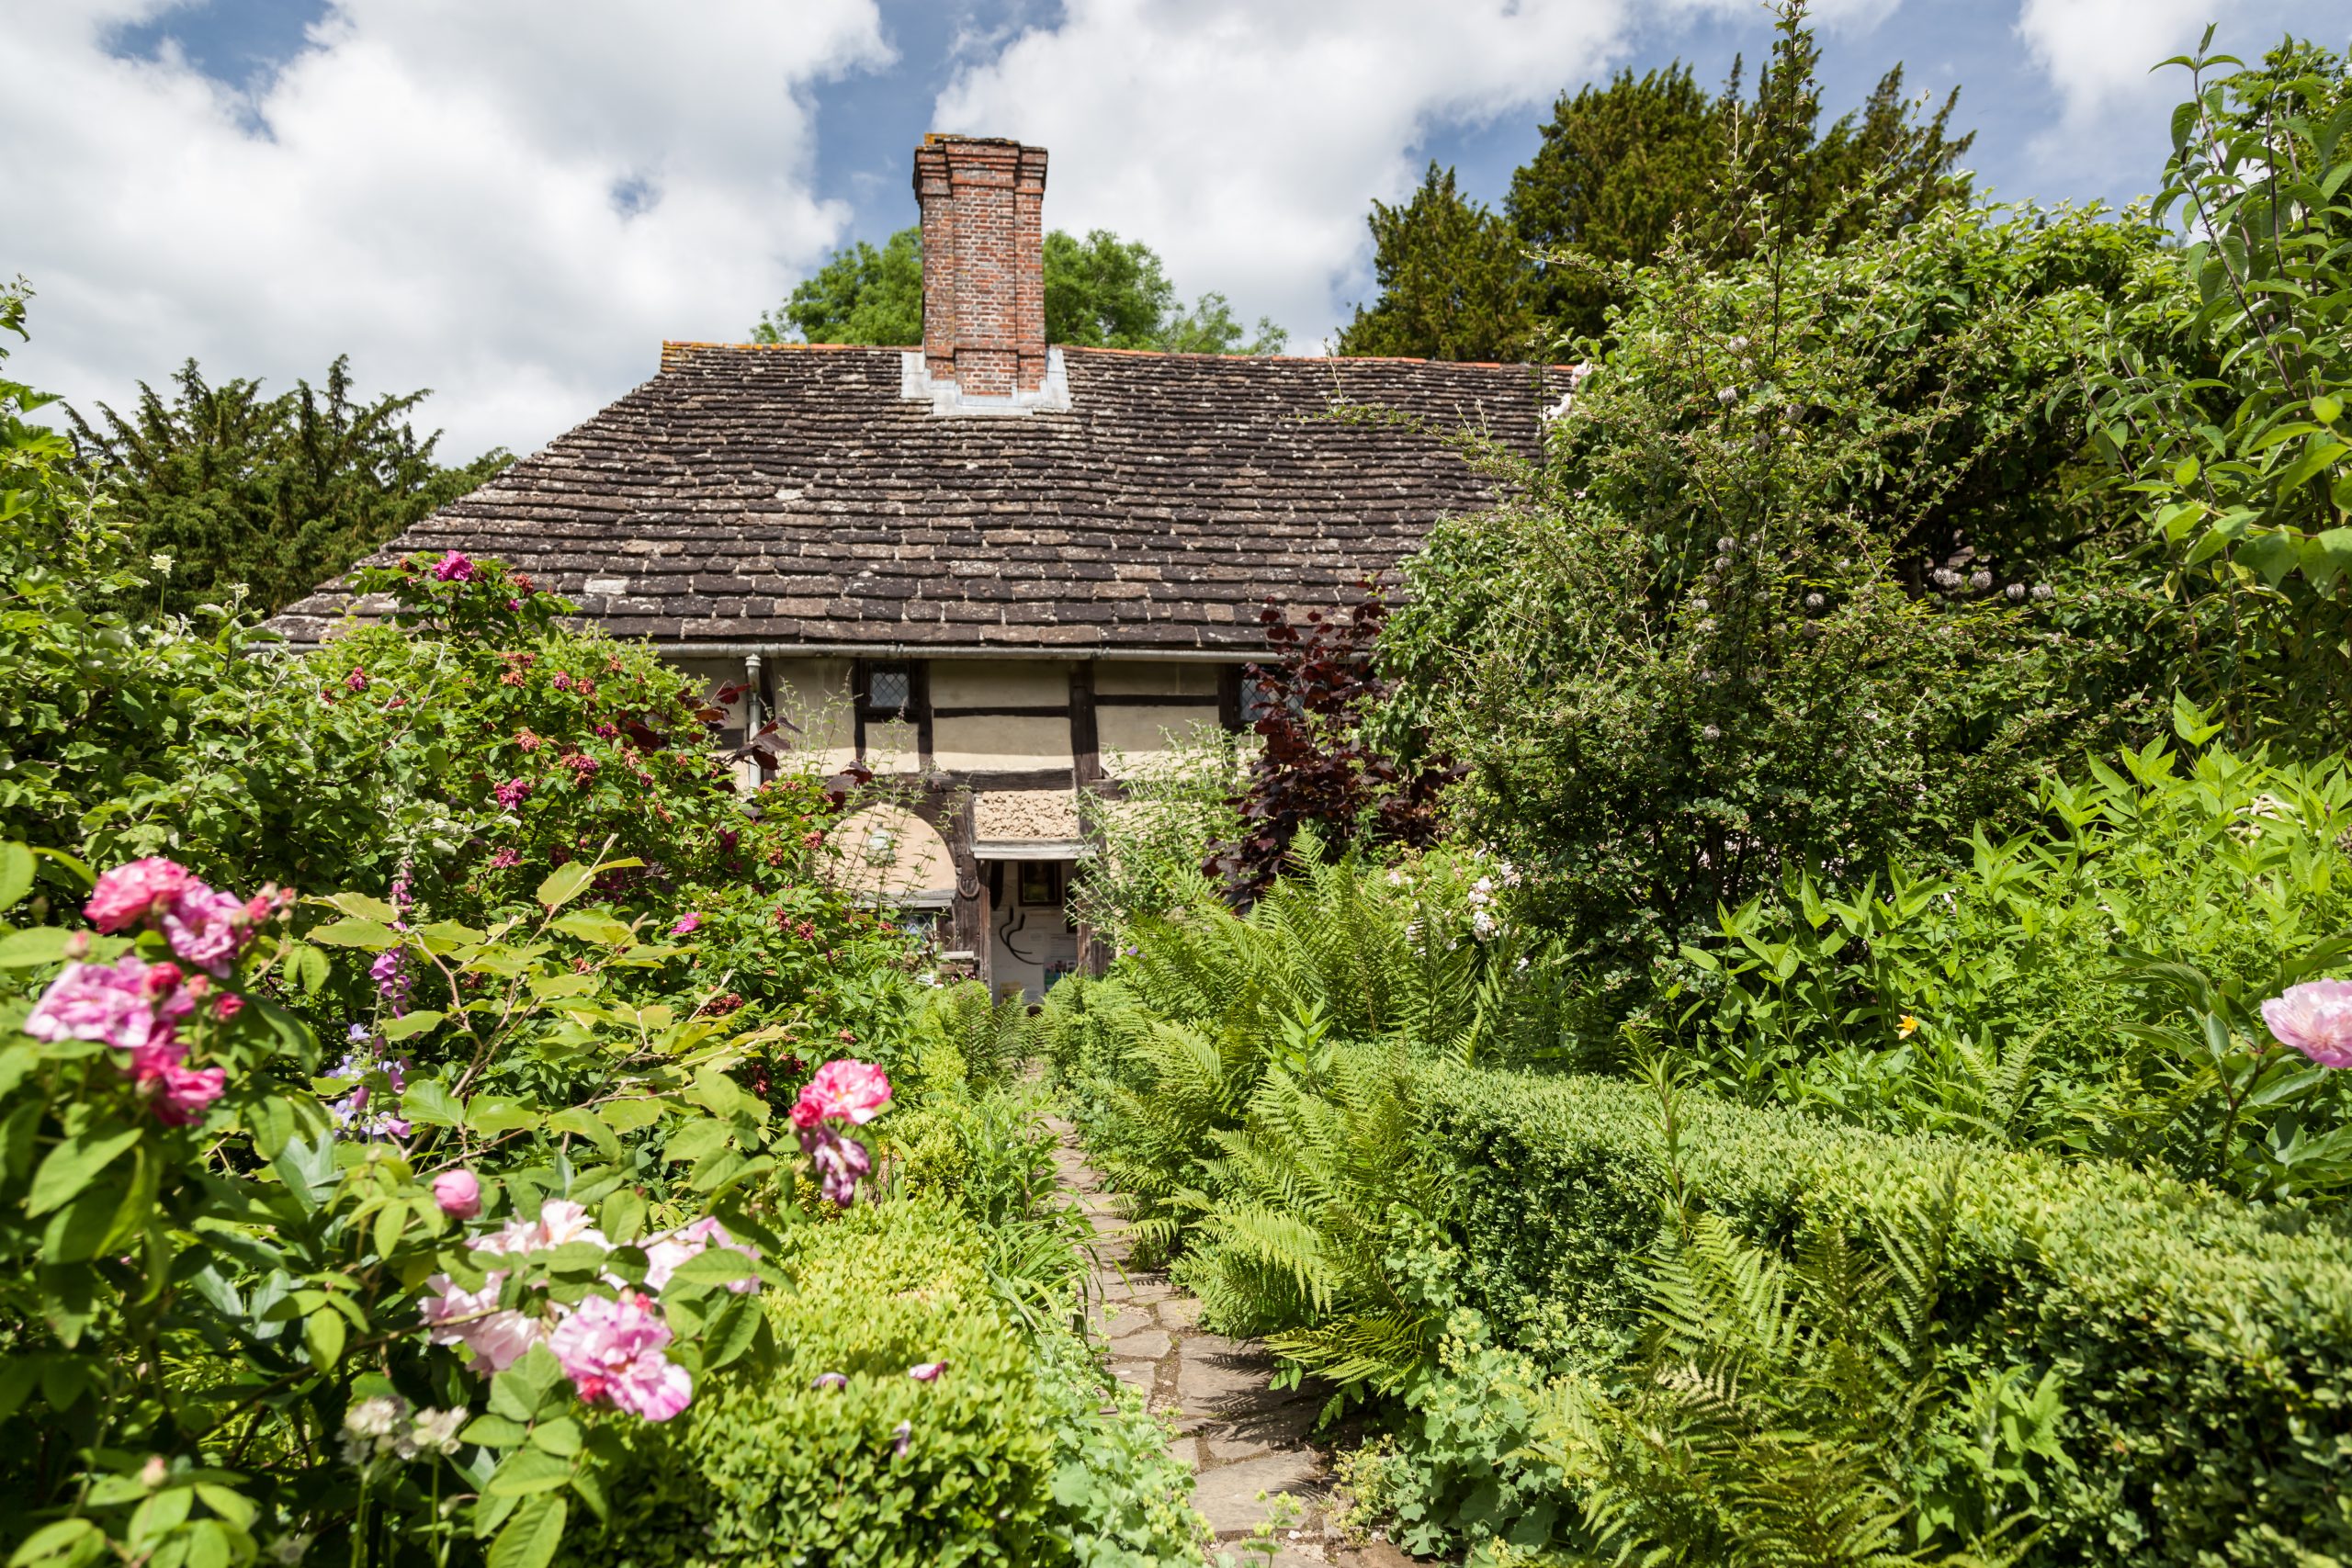 The Priest House in West Hoathly is perfect for a tranquil day out